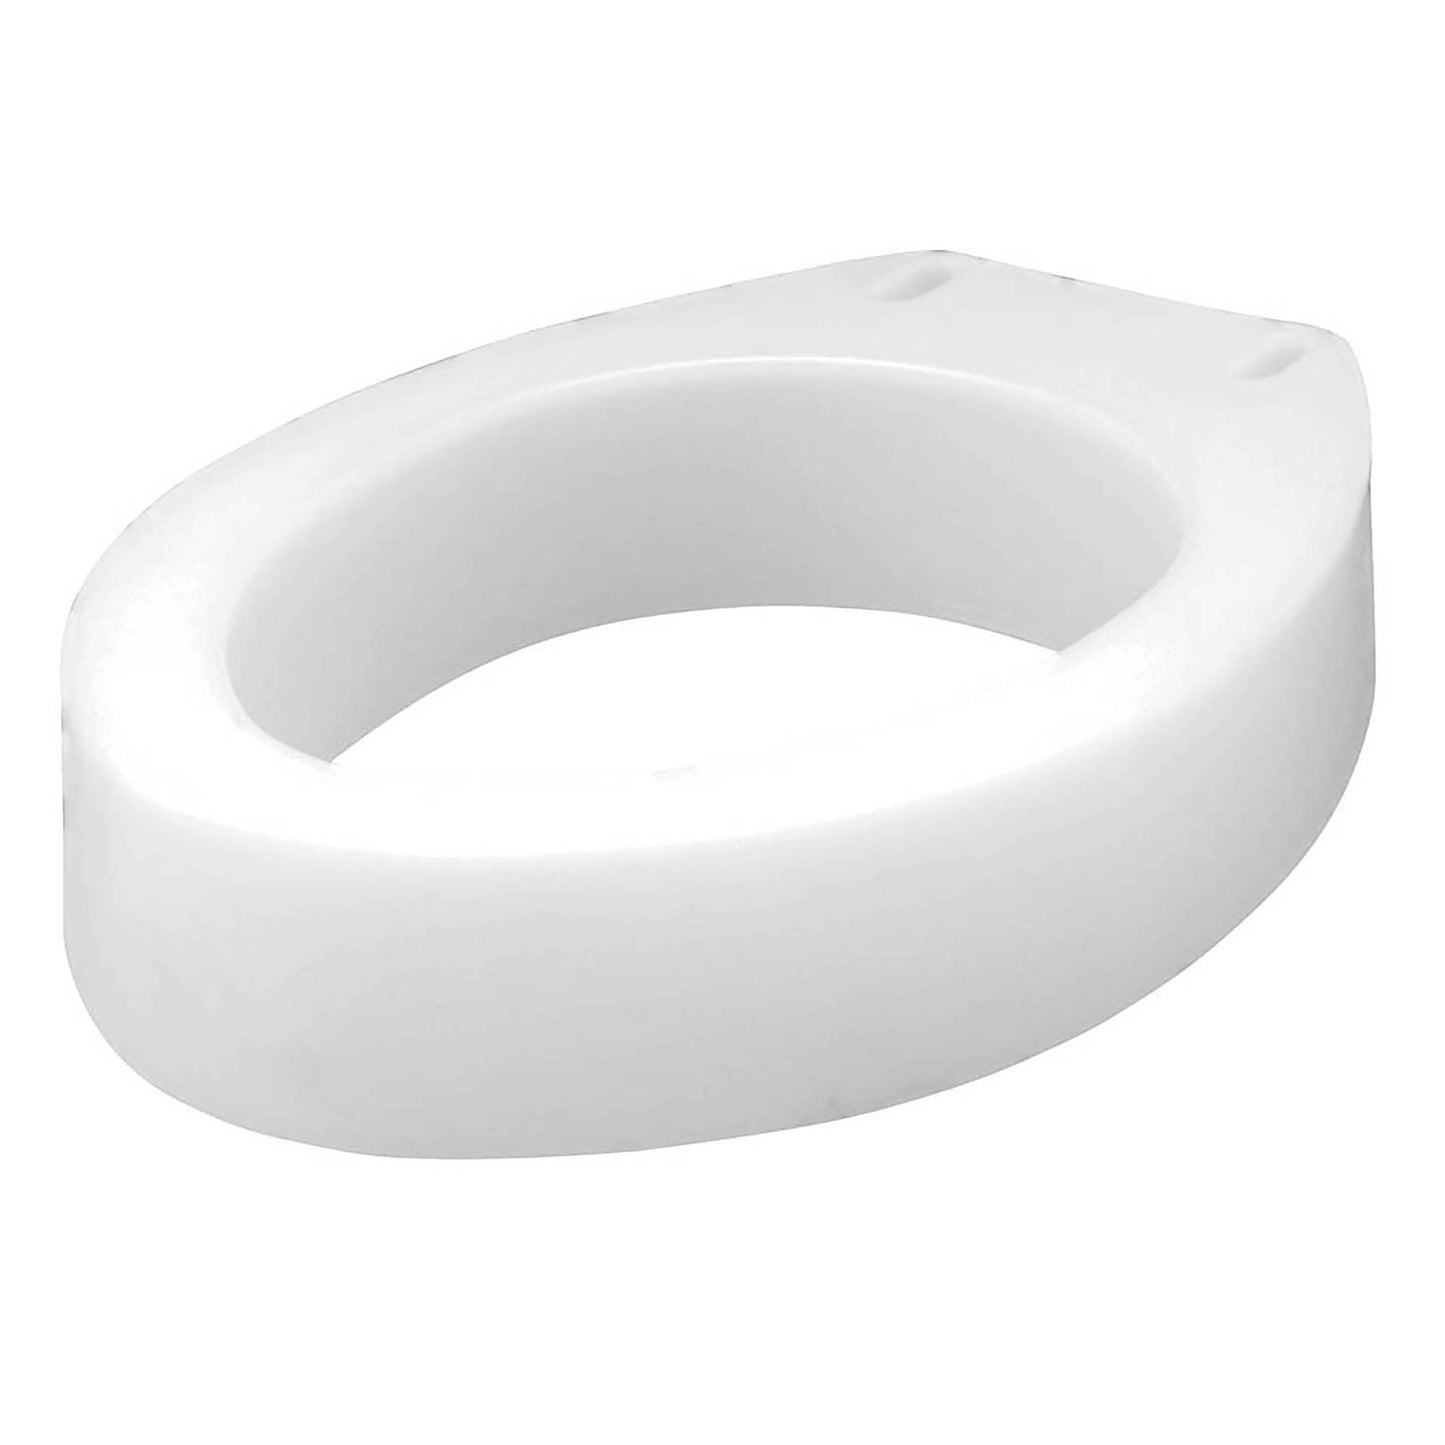 Carex Elongated Raised Toilet Seat, White, 3.5 Inches, 300 lbs. Capacity, 4 ct